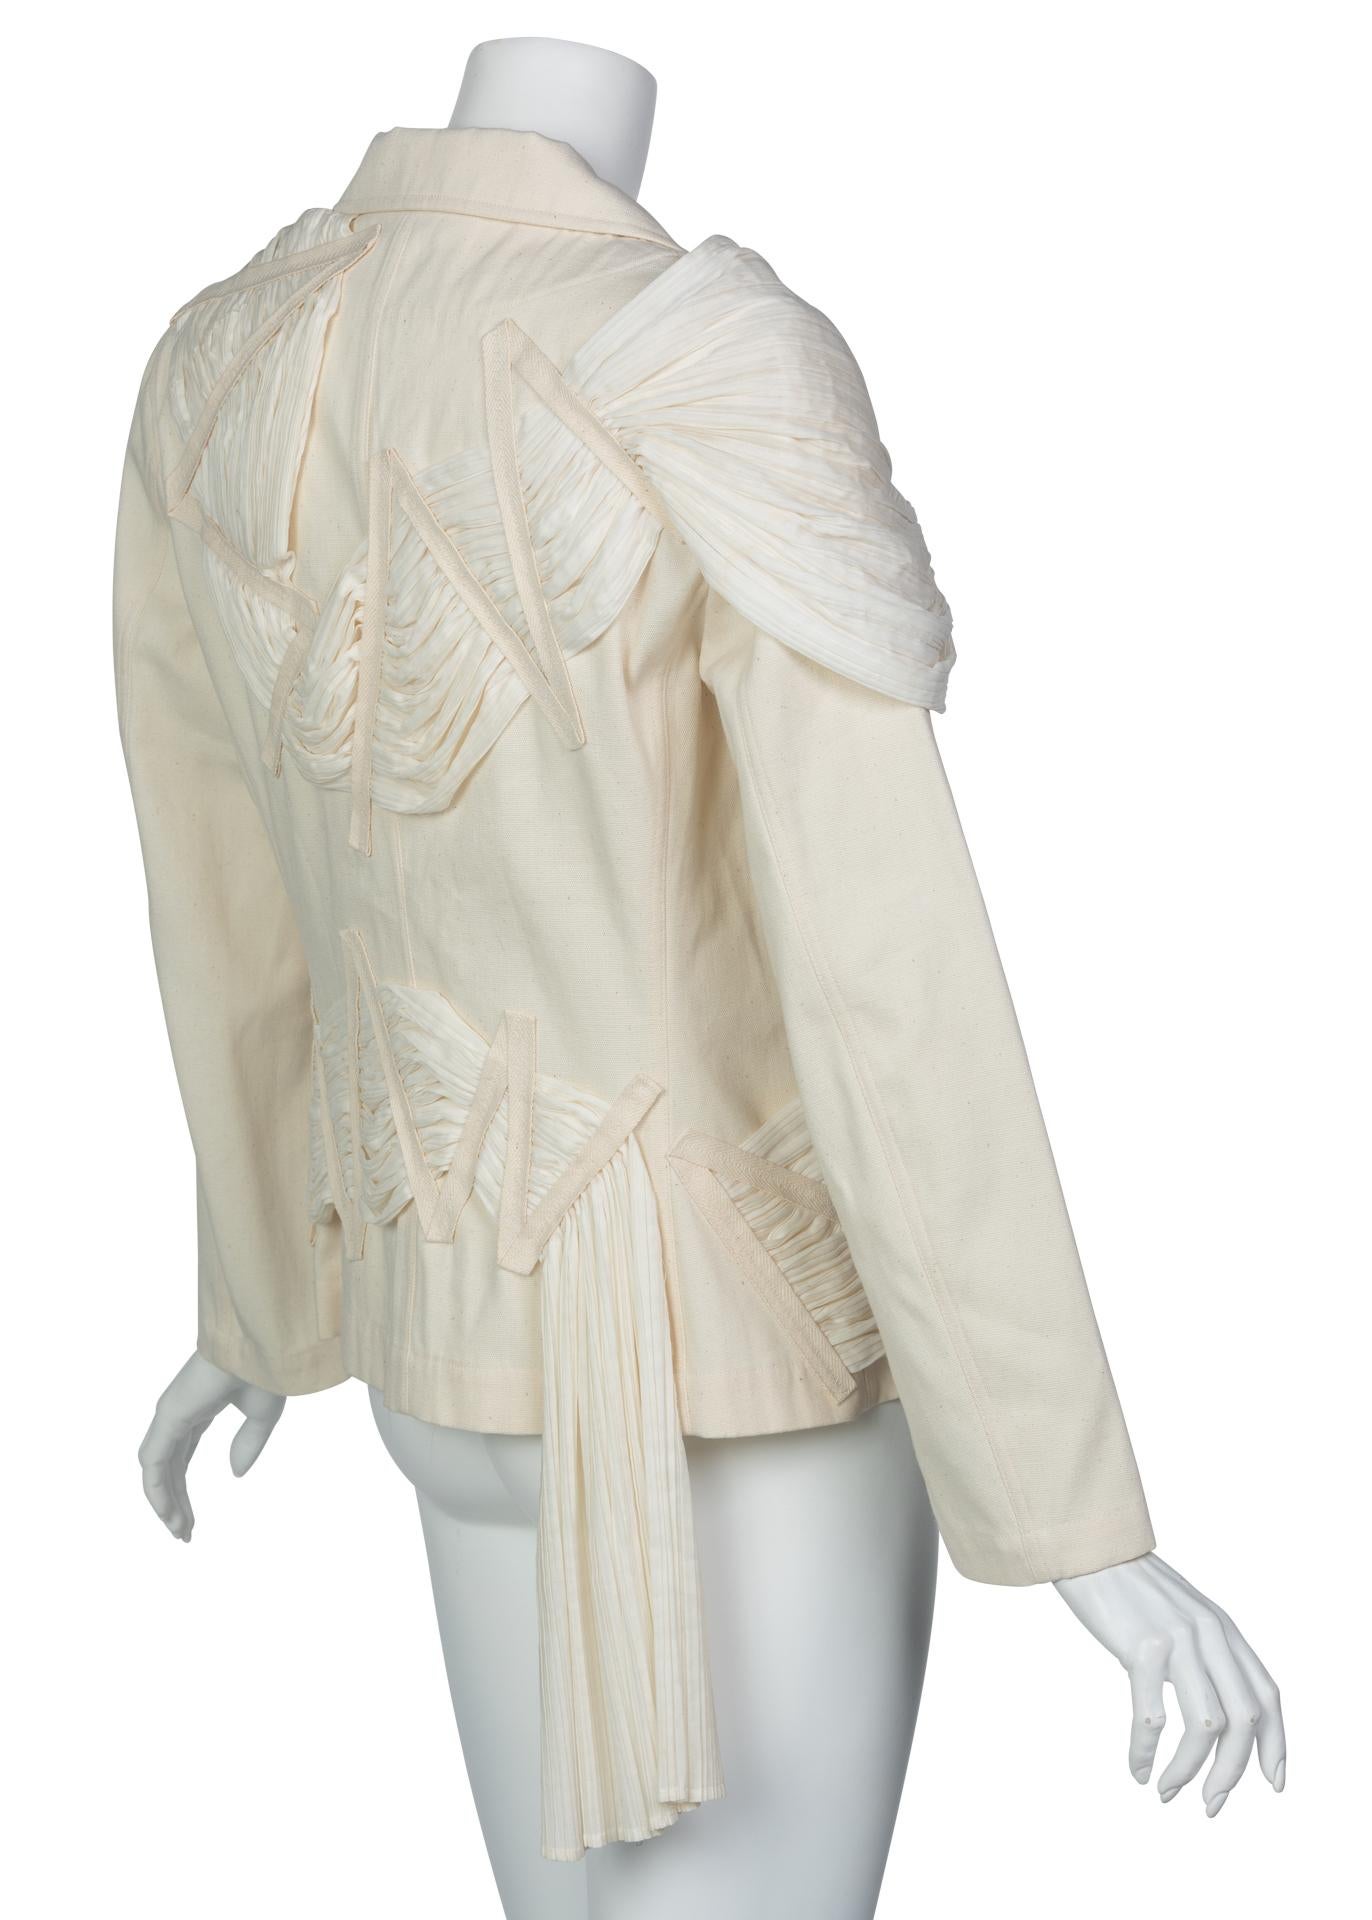 Issey Miyake S/S 2003 Runway Cream Cotton Canvas Jacket Museum Piece For Sale 1